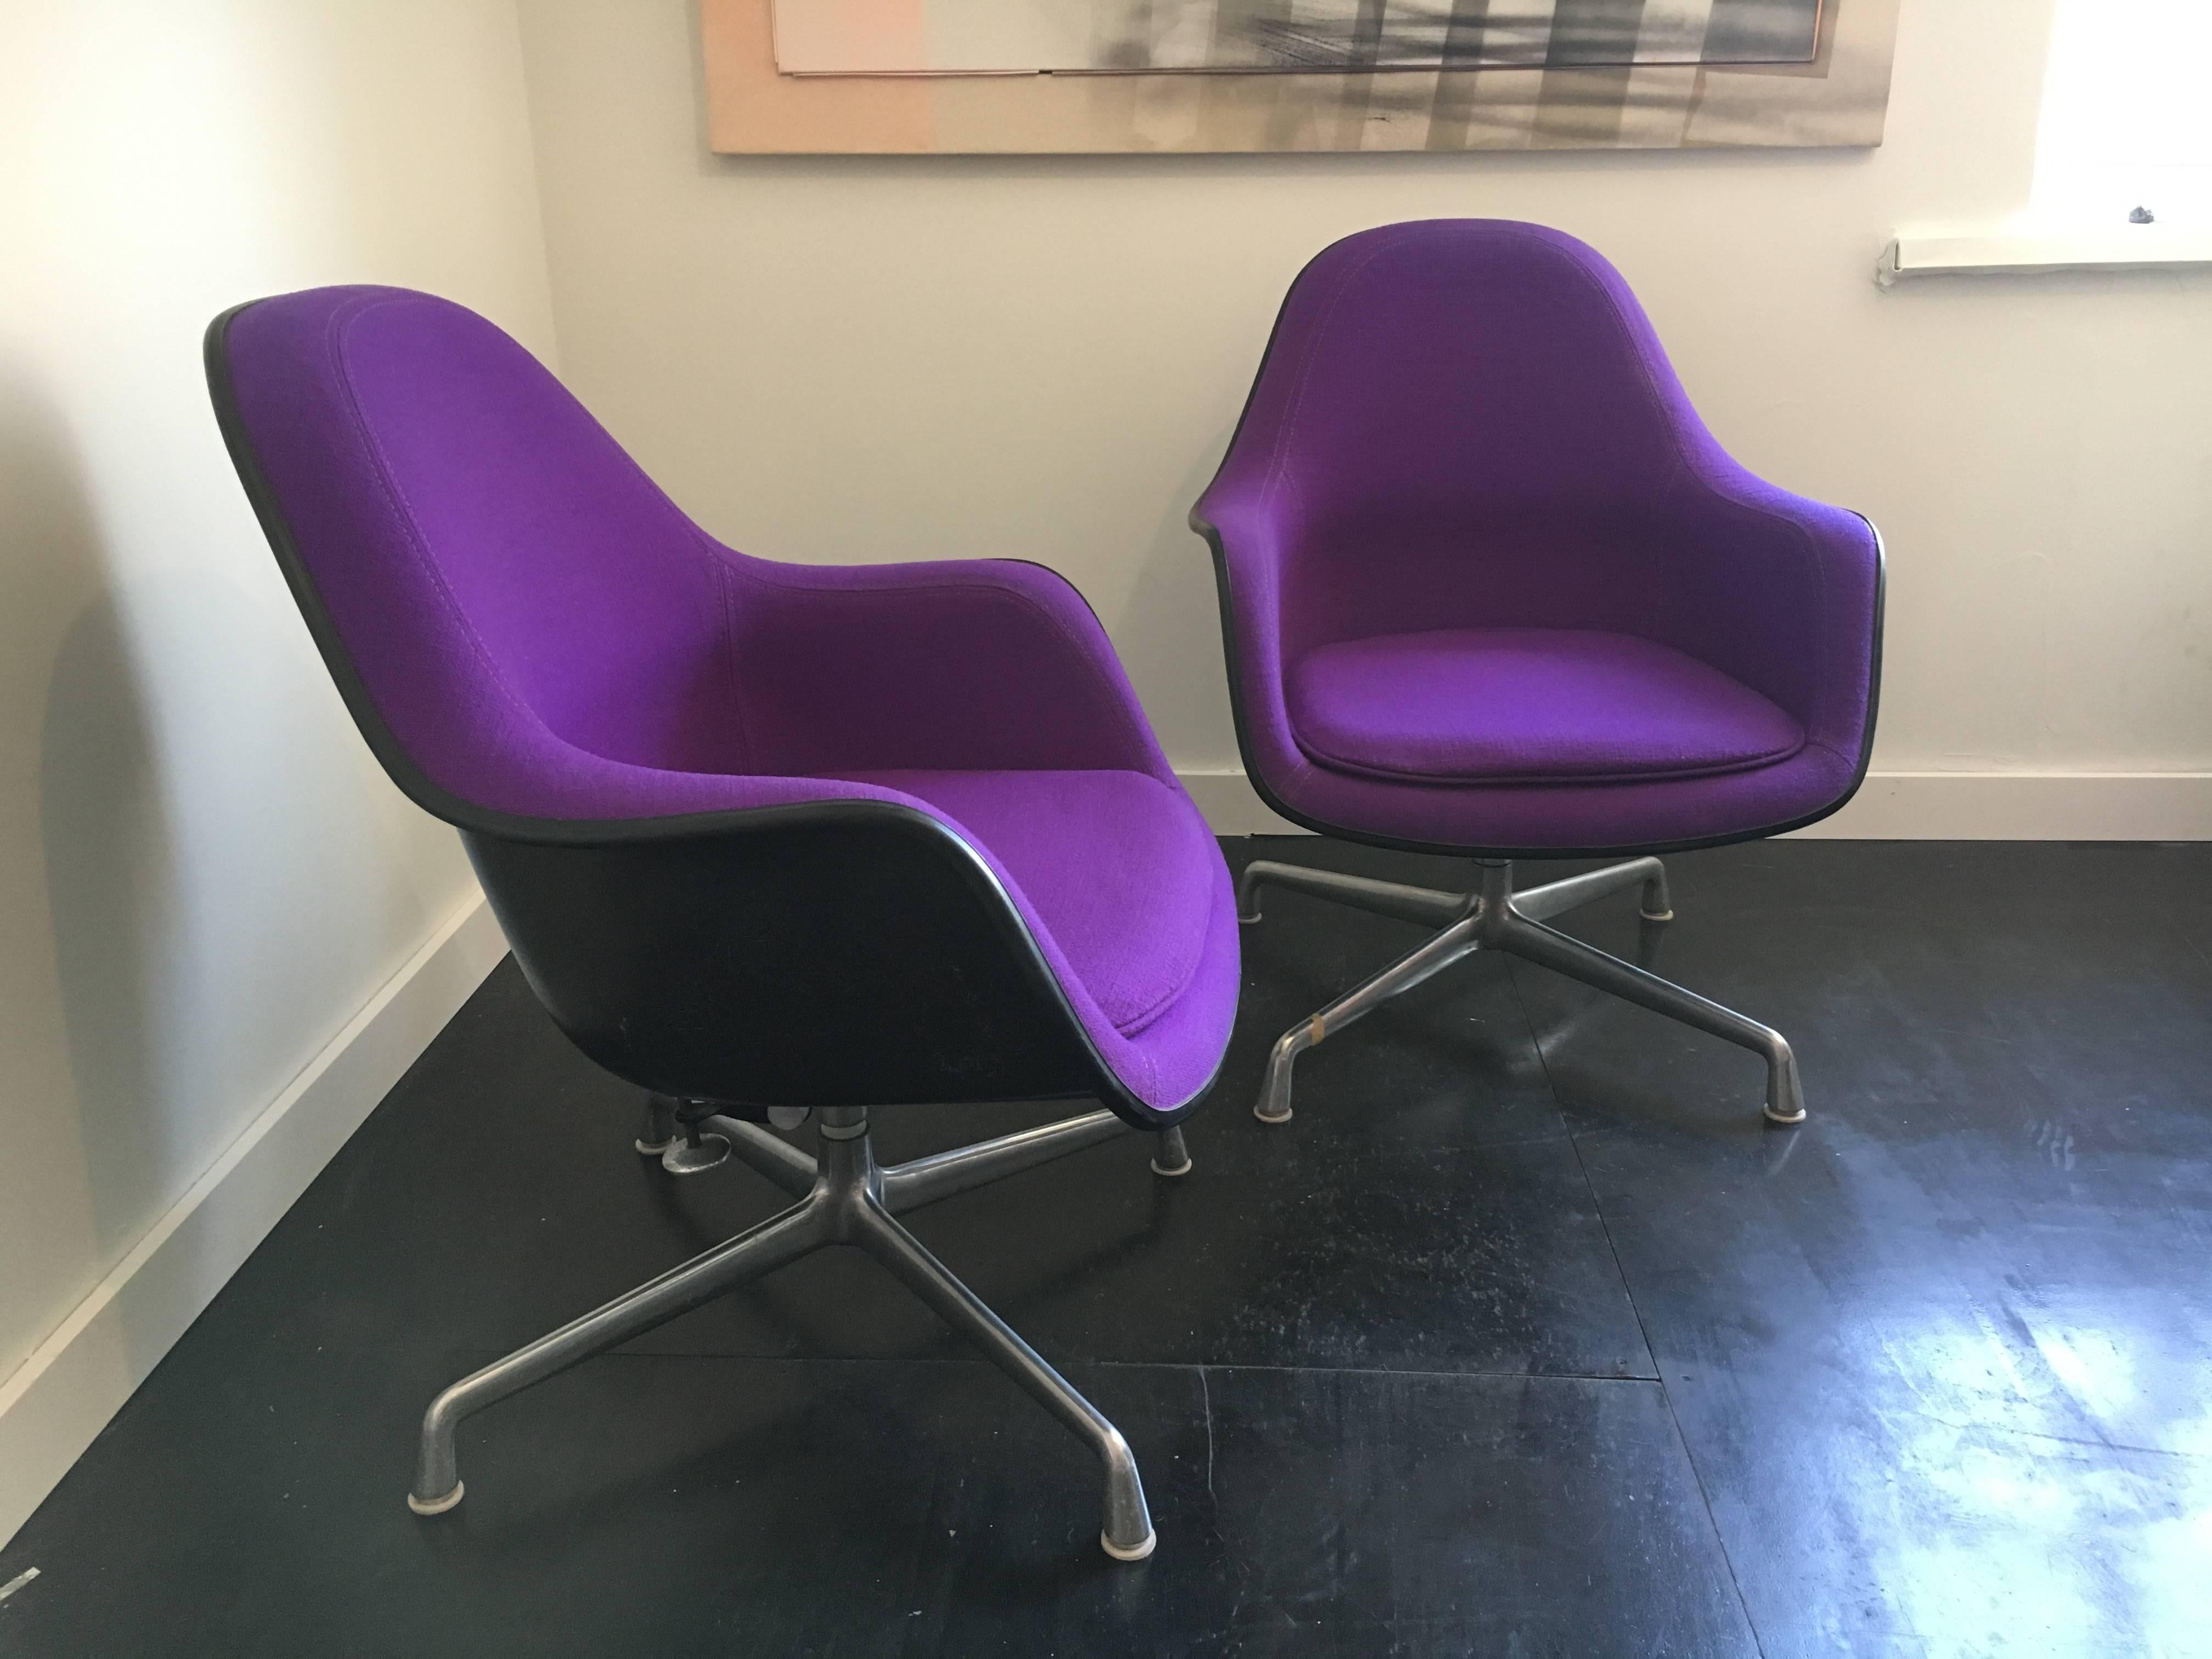 Rare pair of lounge chairs designed by Charles & Ray Eames for Herman Miller. Black fiber glass shell upholstered in original Girard hopsack. Chairs swivel, adjustable seat height with tilt- base.

We have 2 pairs available, please contact us if